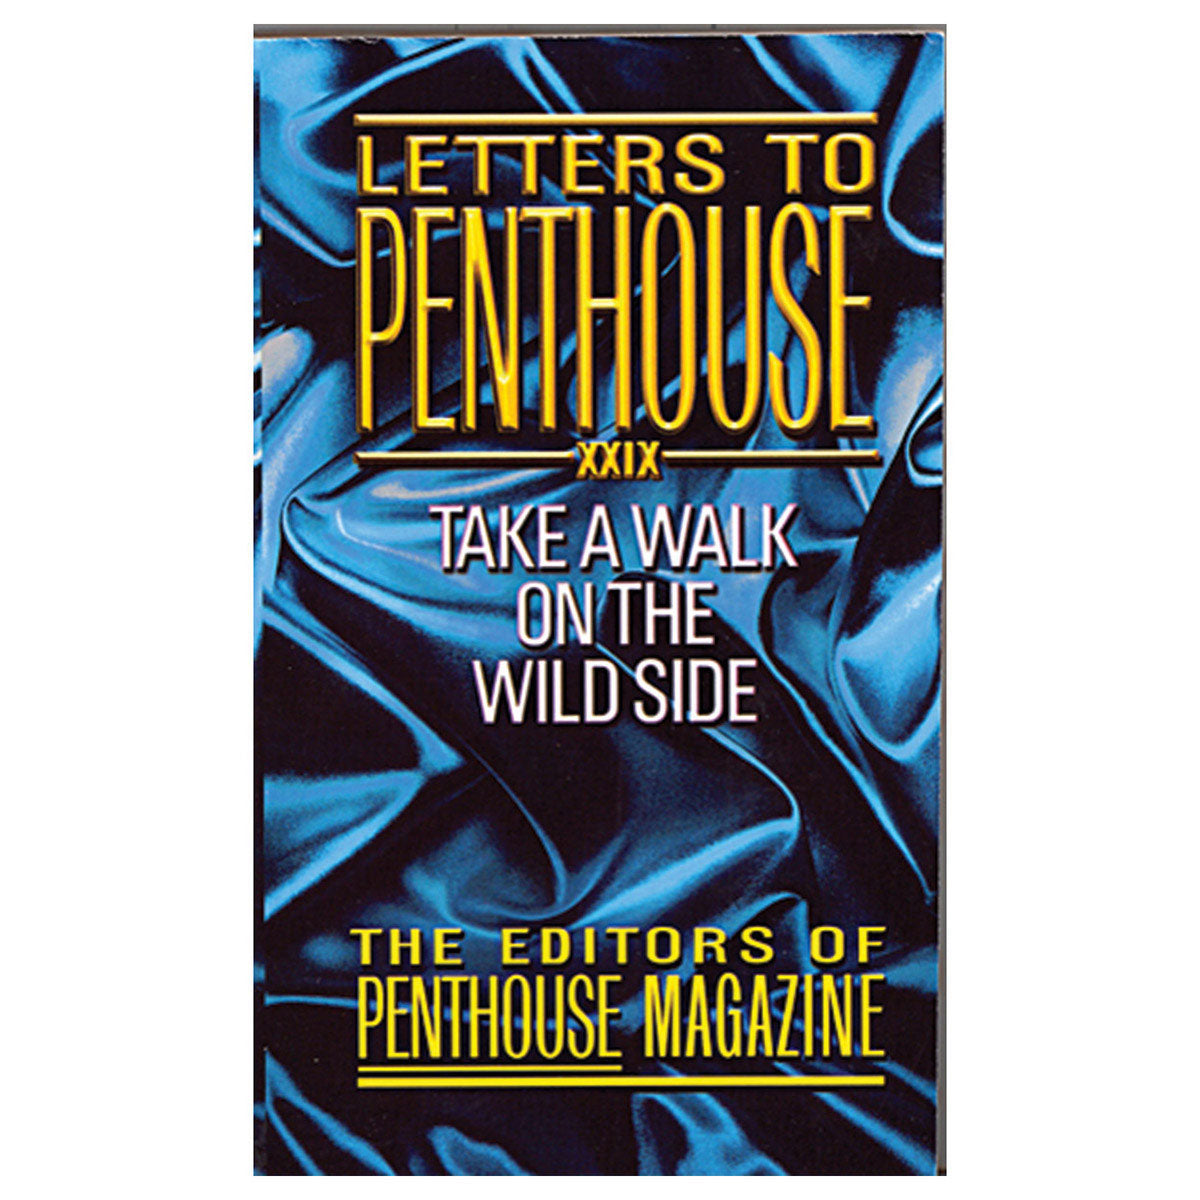 Letters to Penthouse XXIX - Take a Walk on the Wild Side - Warner Books